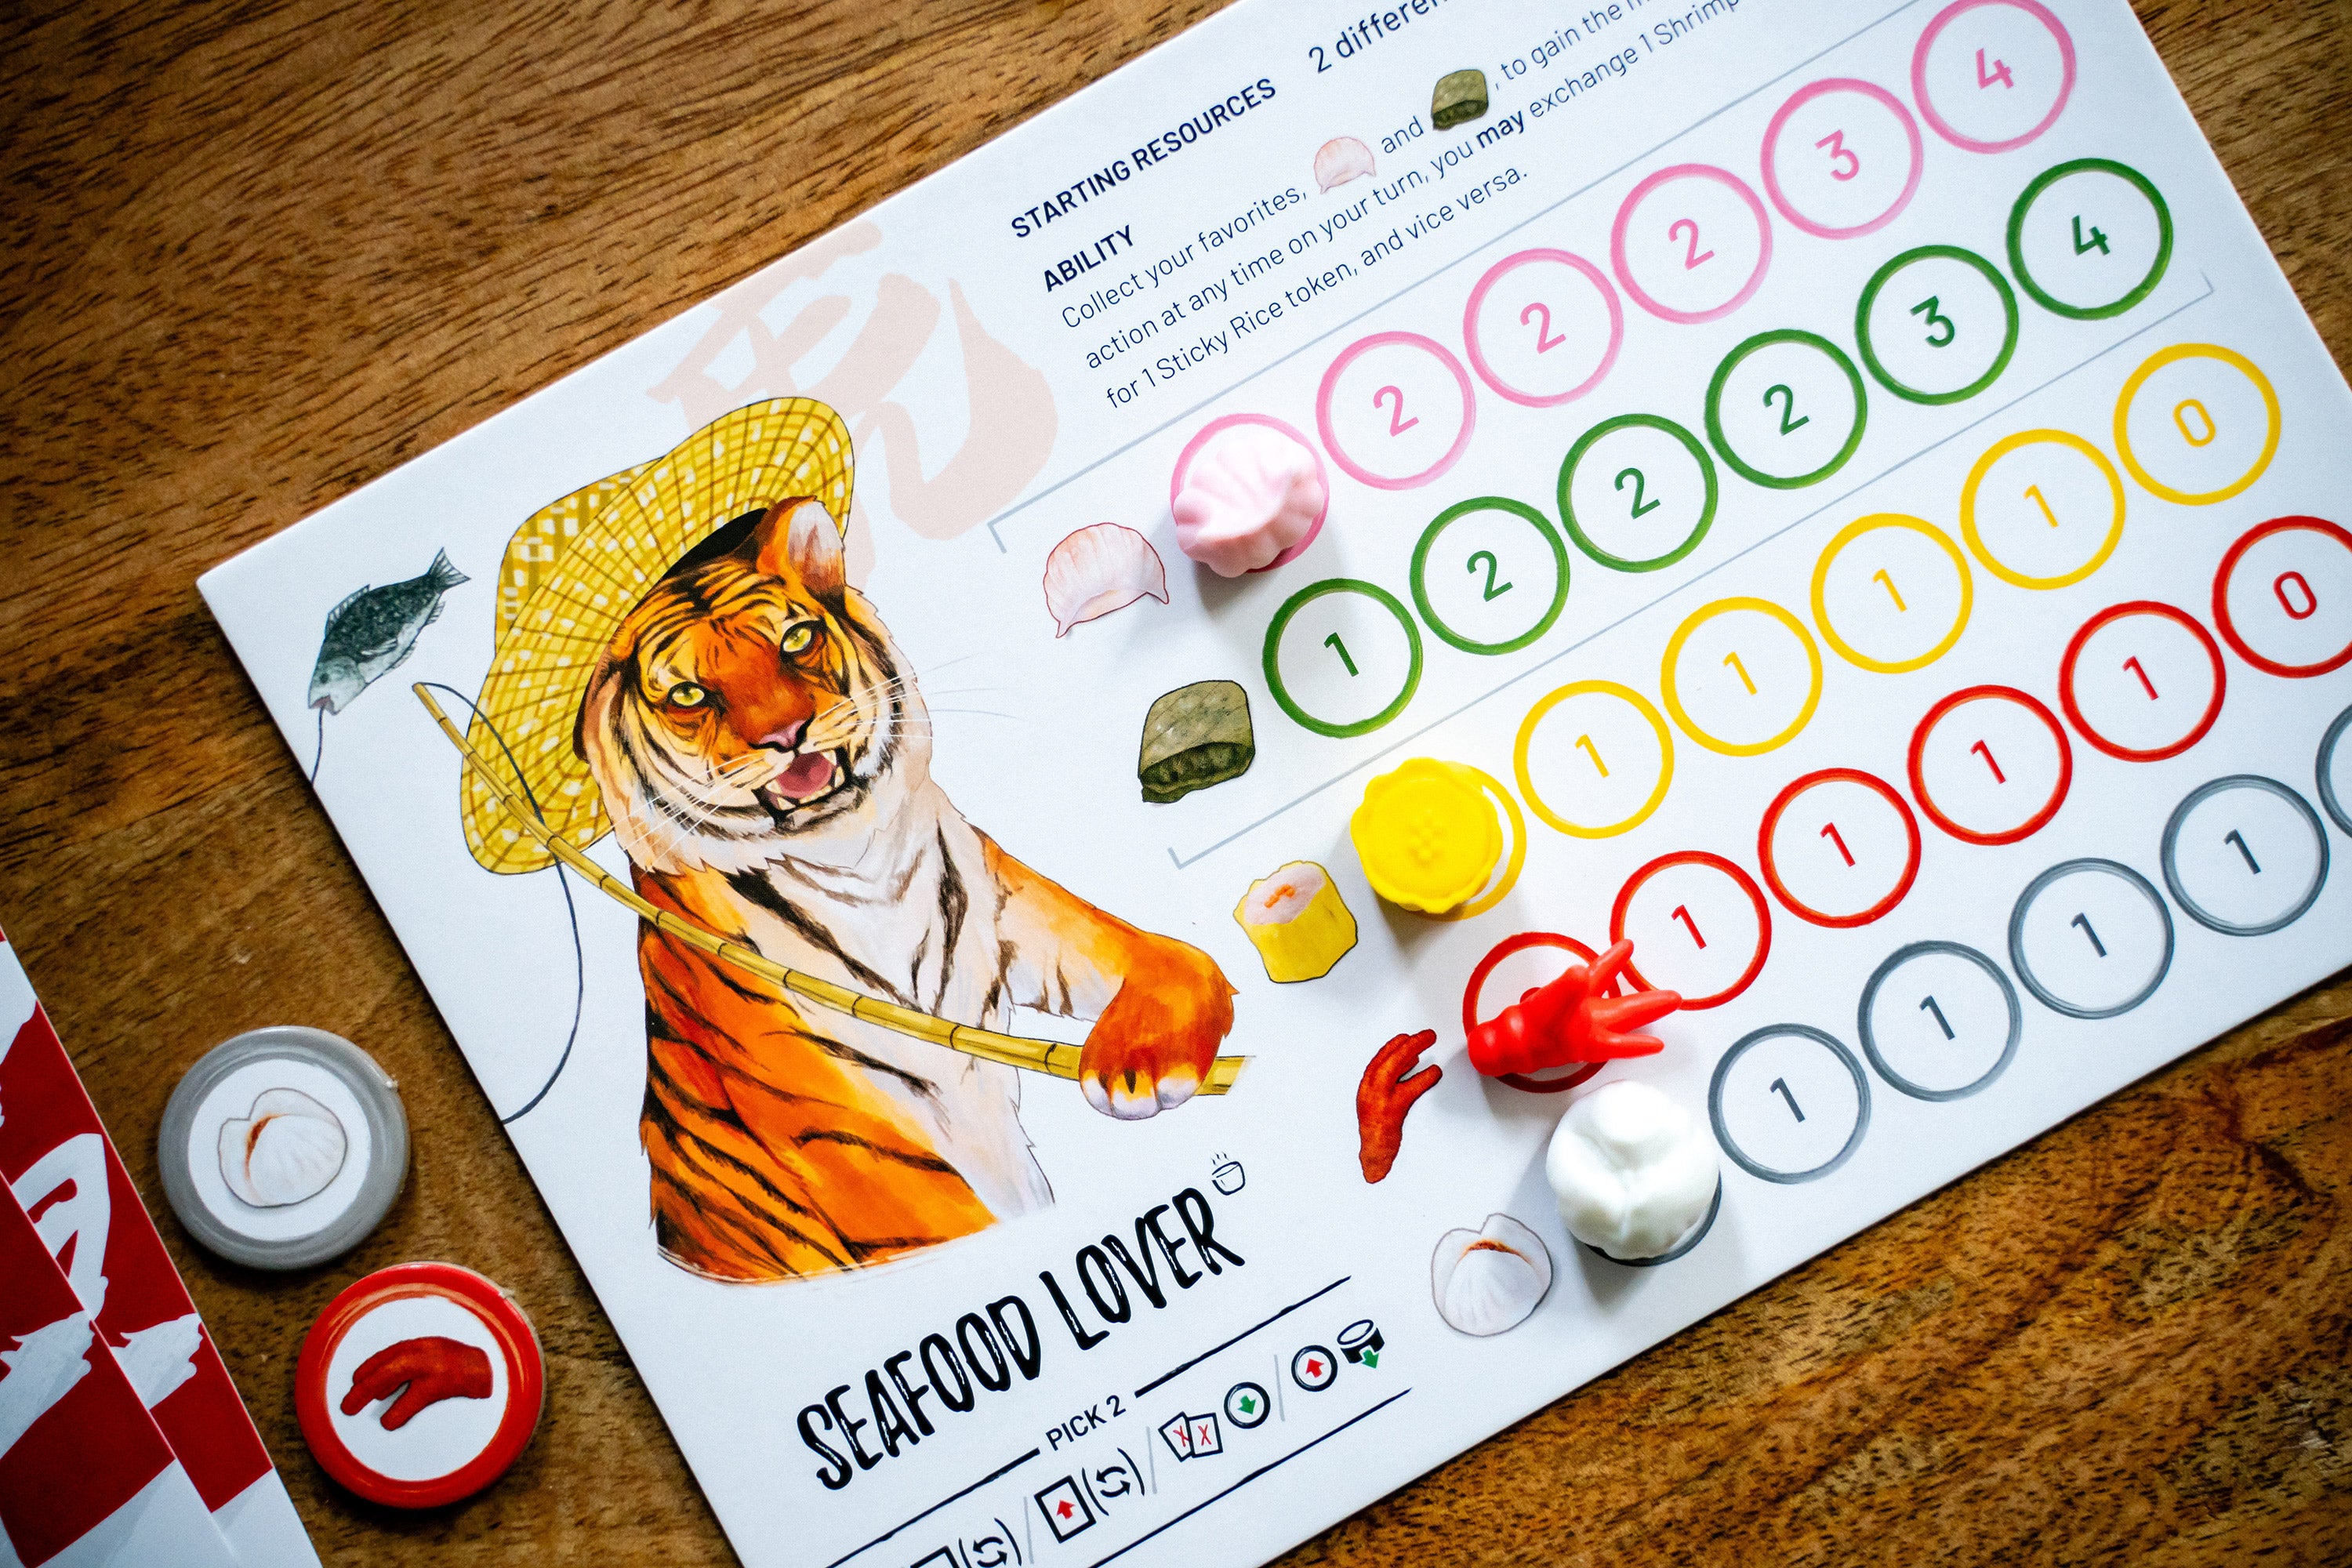 Place Dim Sum on your animal board to score points